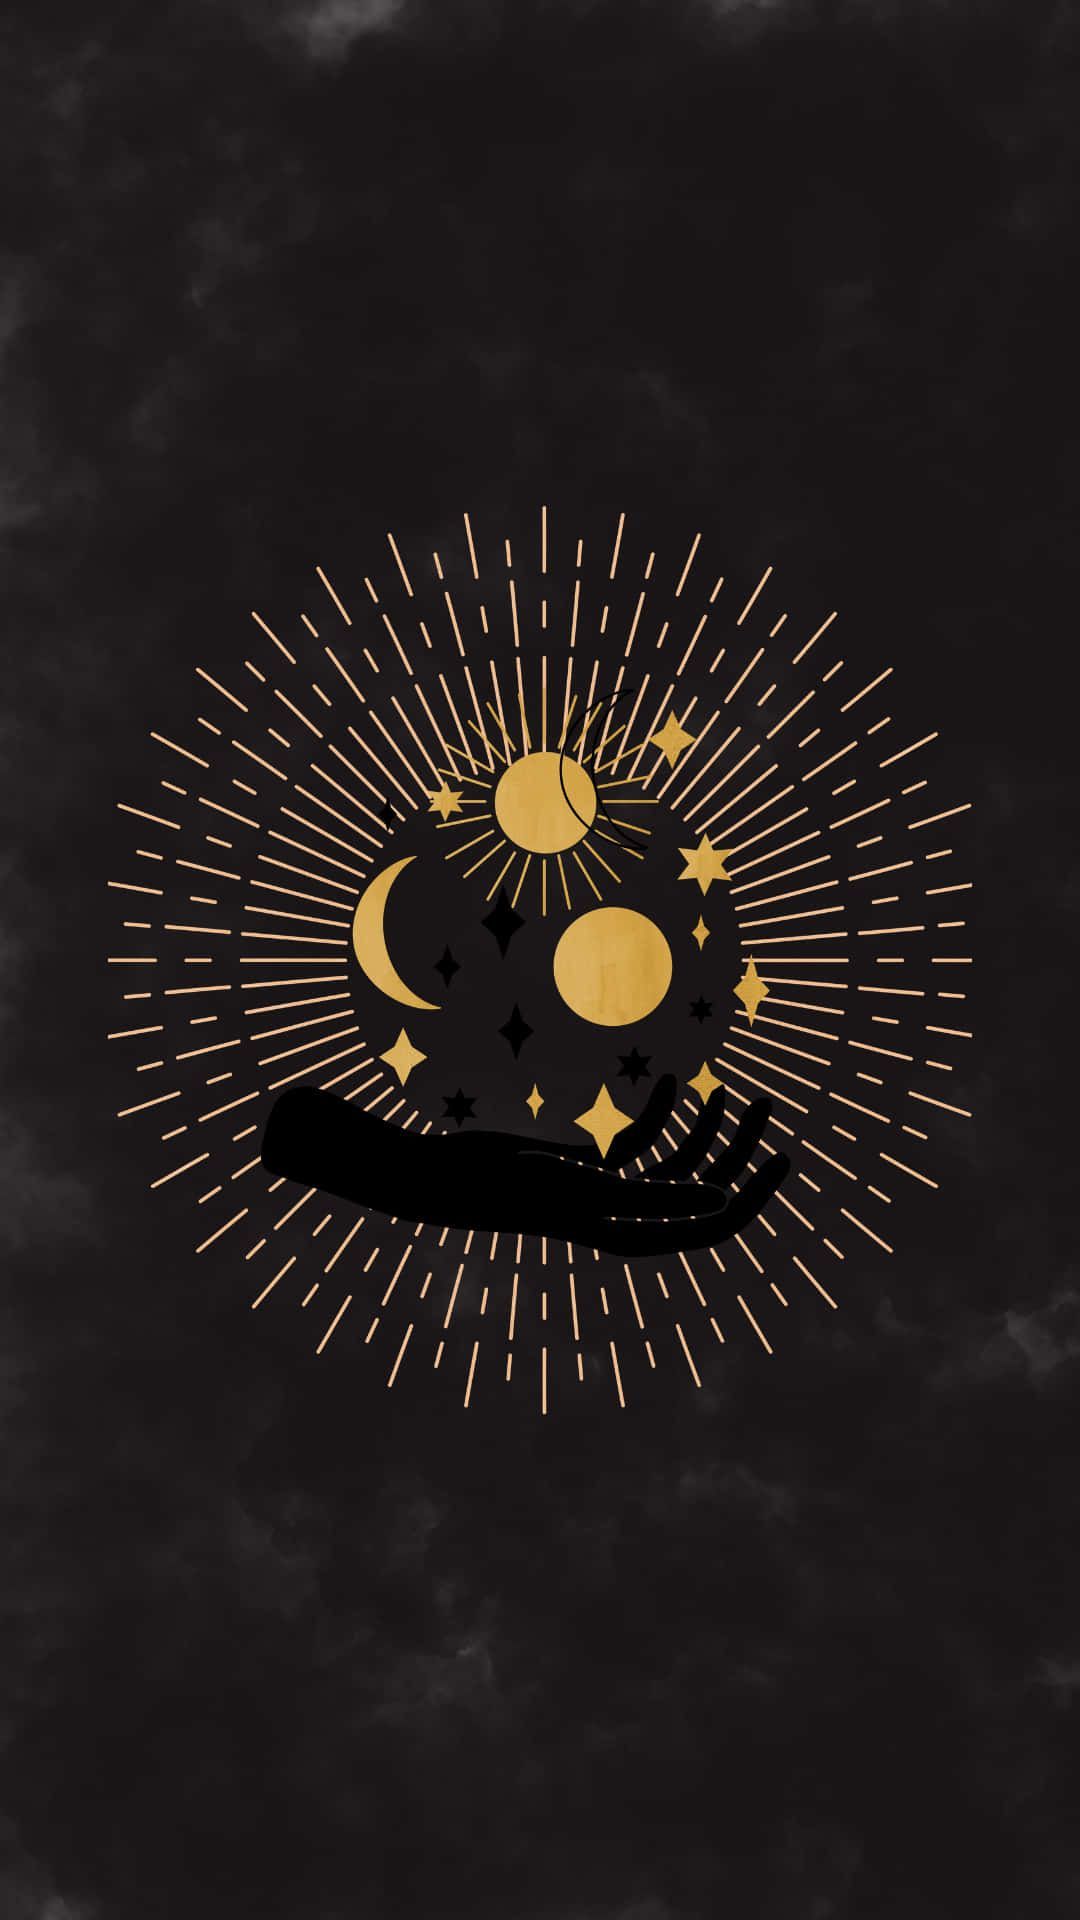 IPhone wallpaper with a black background and a gold moon, sun, and stars - Magic